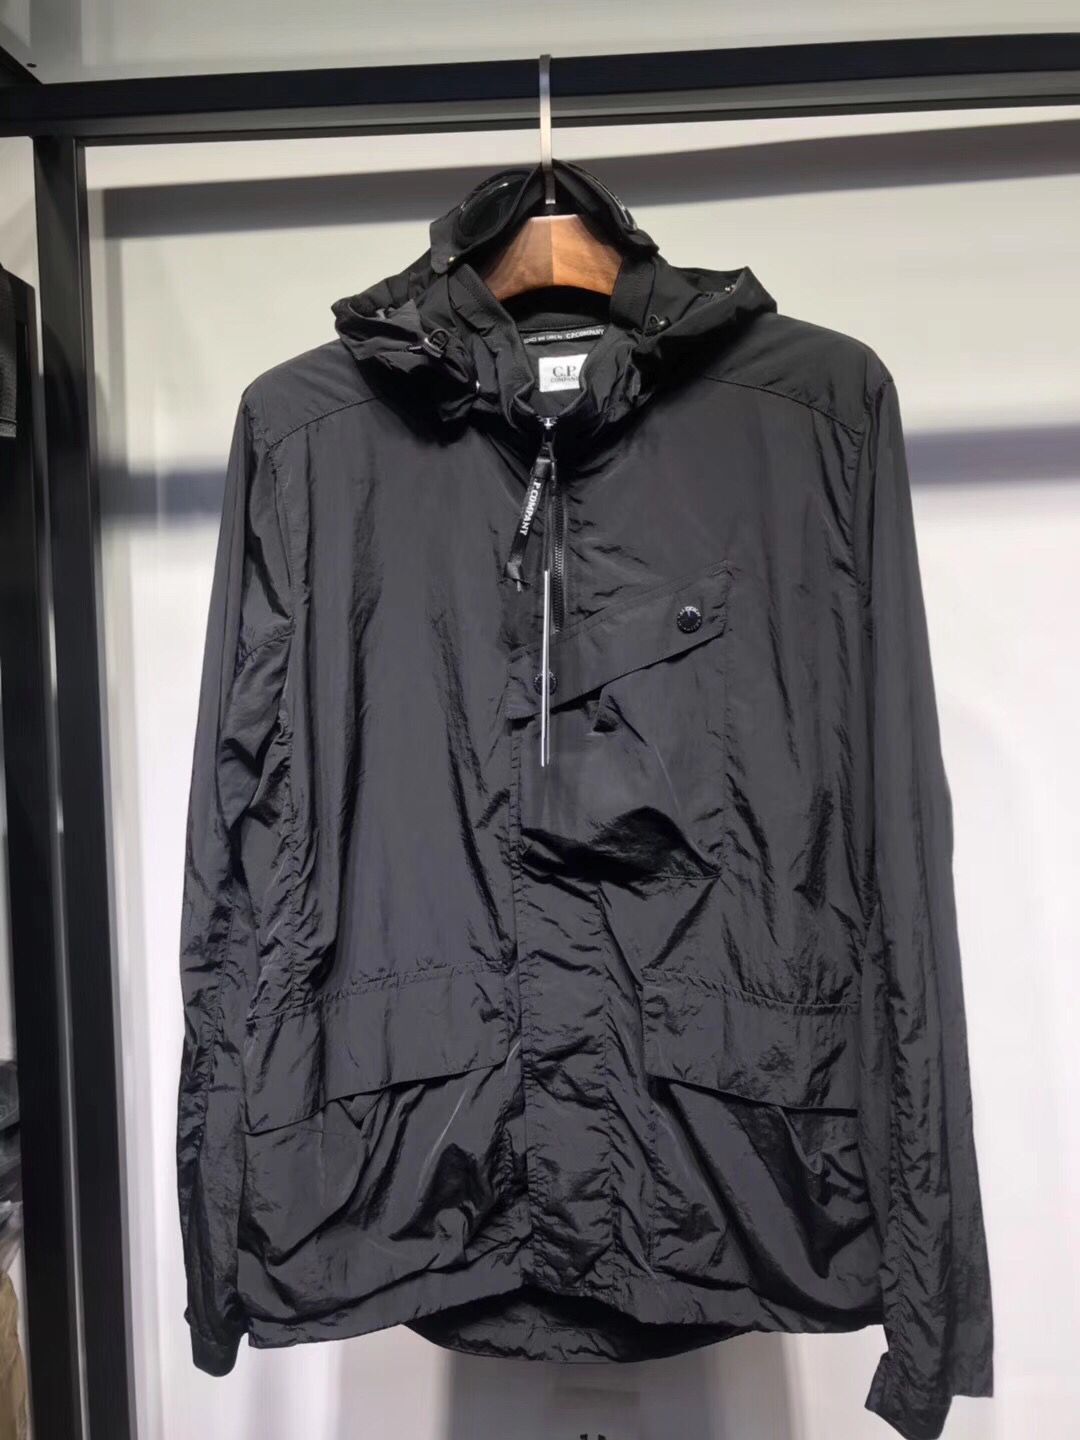 Blackcp Spring autumn winter new pattern man trend easy tide glasses loose coat ins Windbreaker have cash less than that is registered in the accounts jacket topstoney